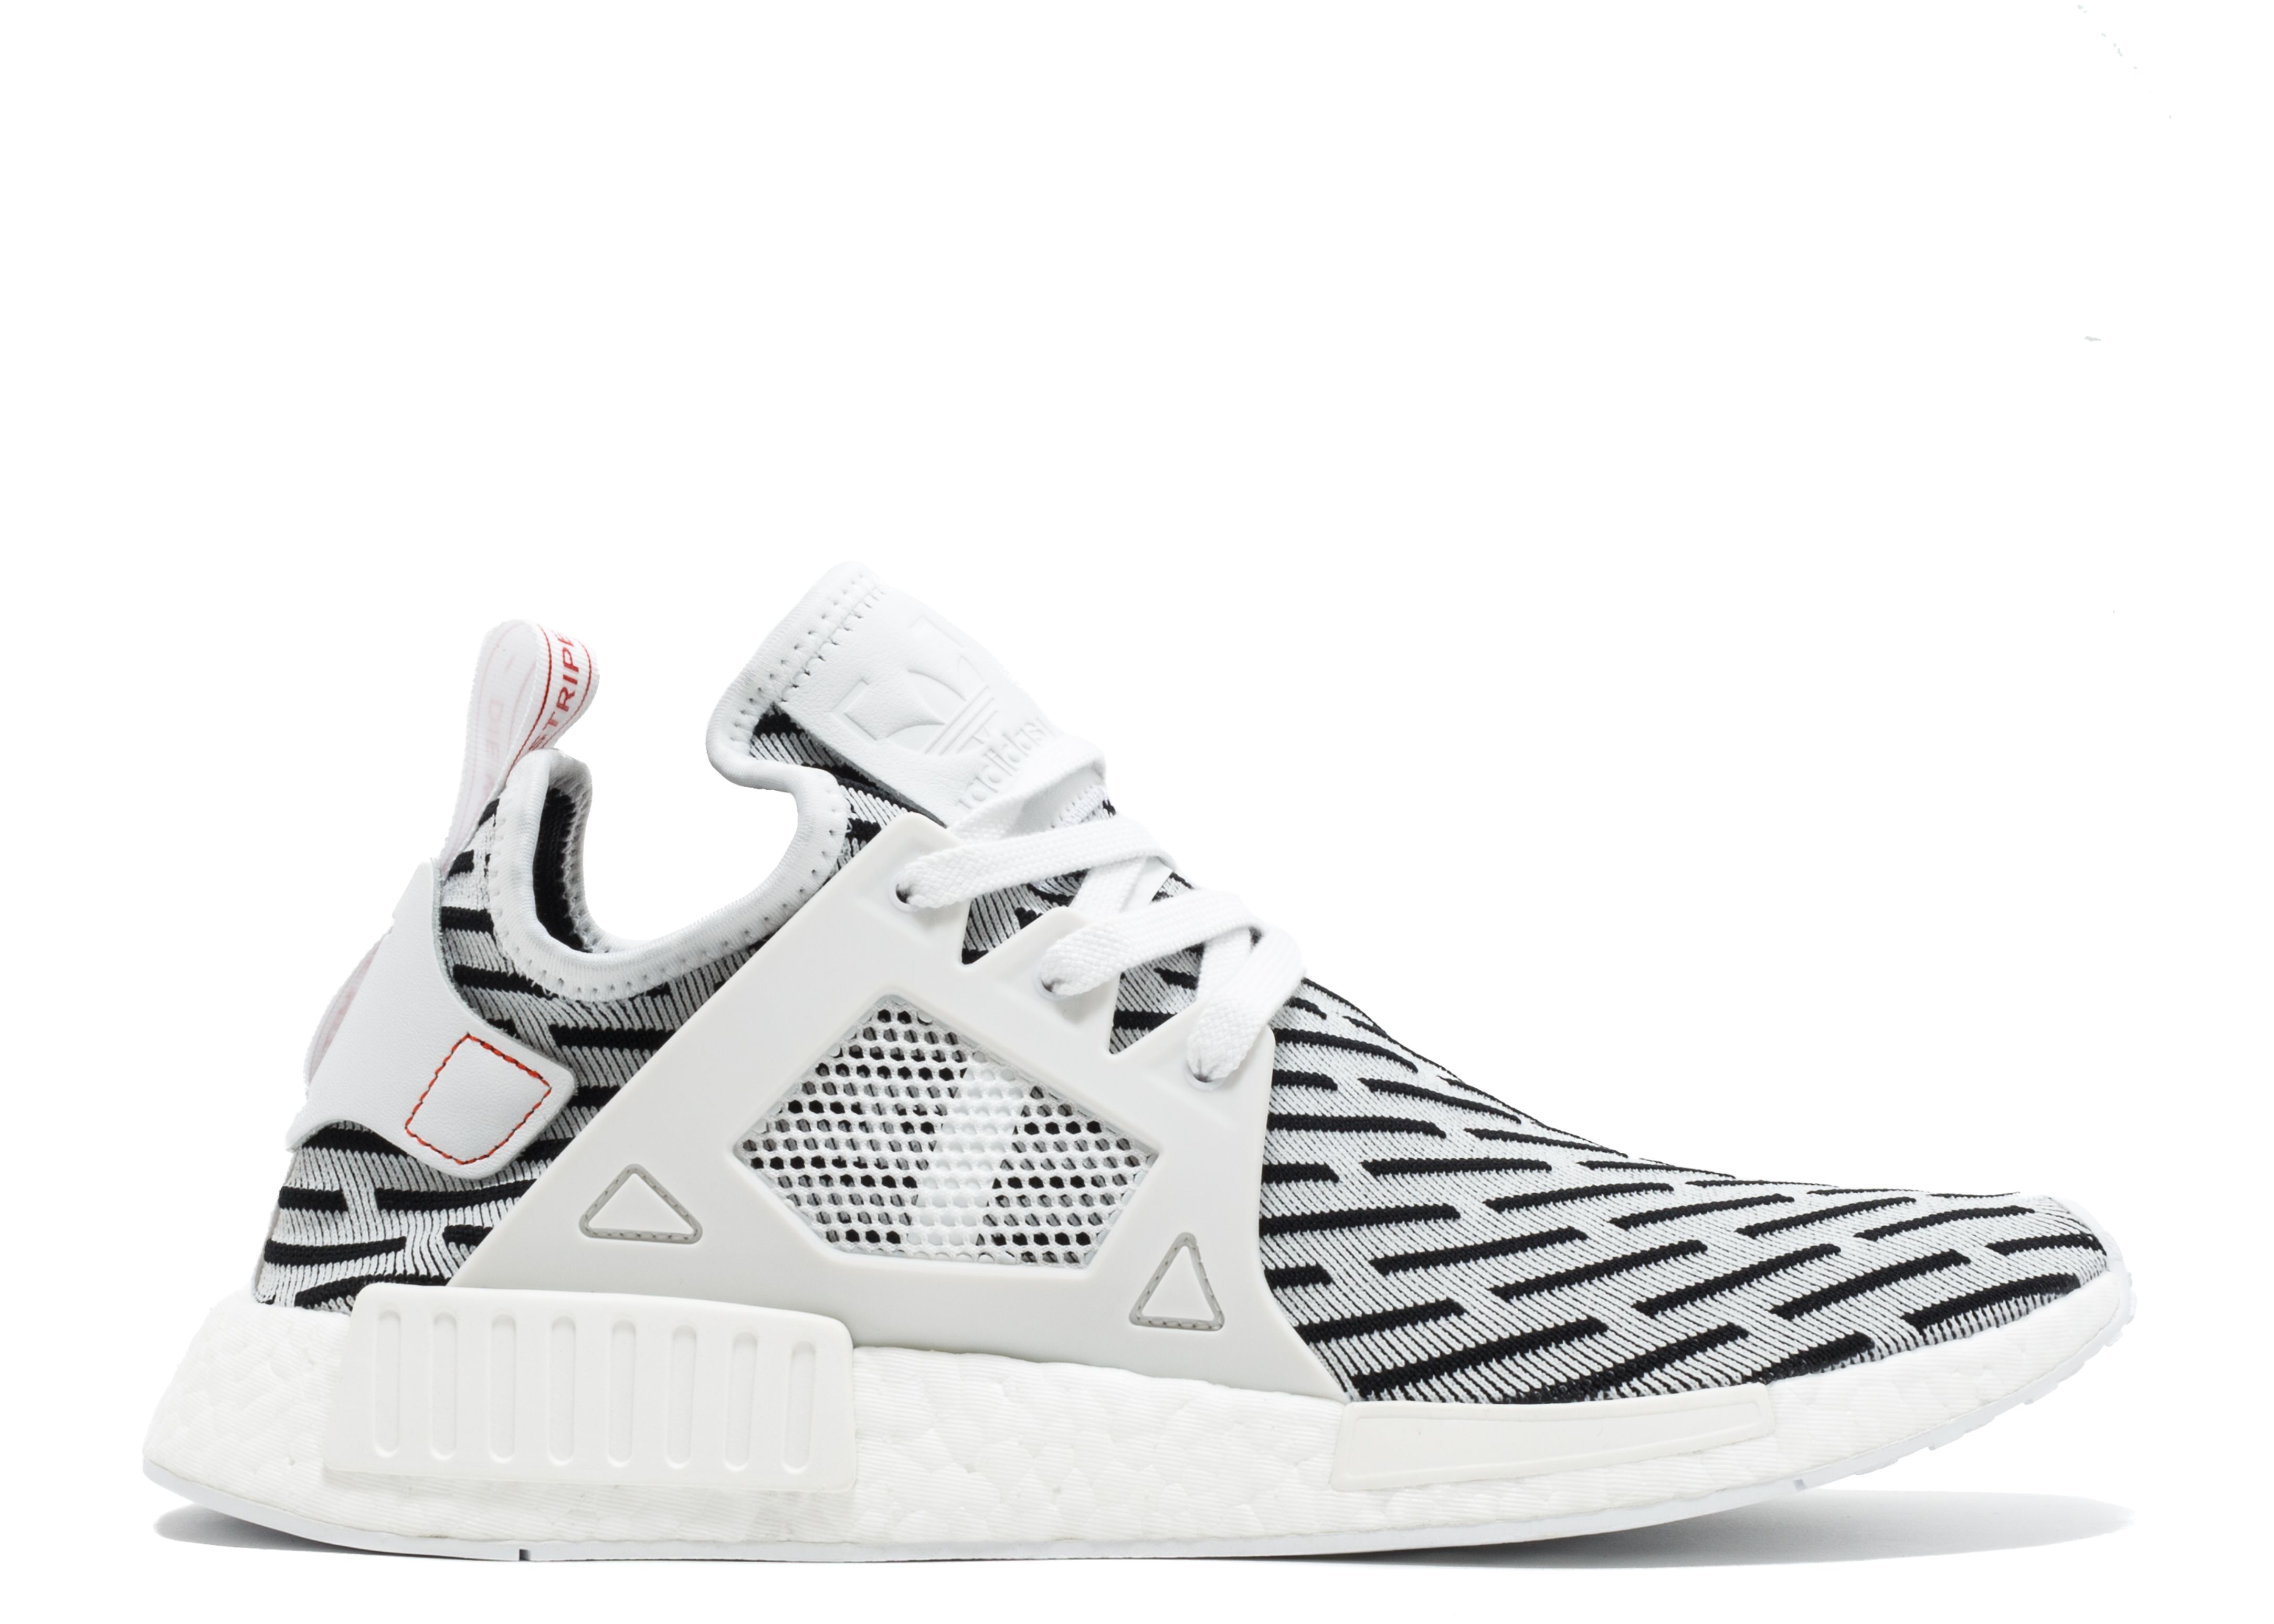 adidas NMD Xr1 W SNEAKERS Burgundy White BY9820 39 1